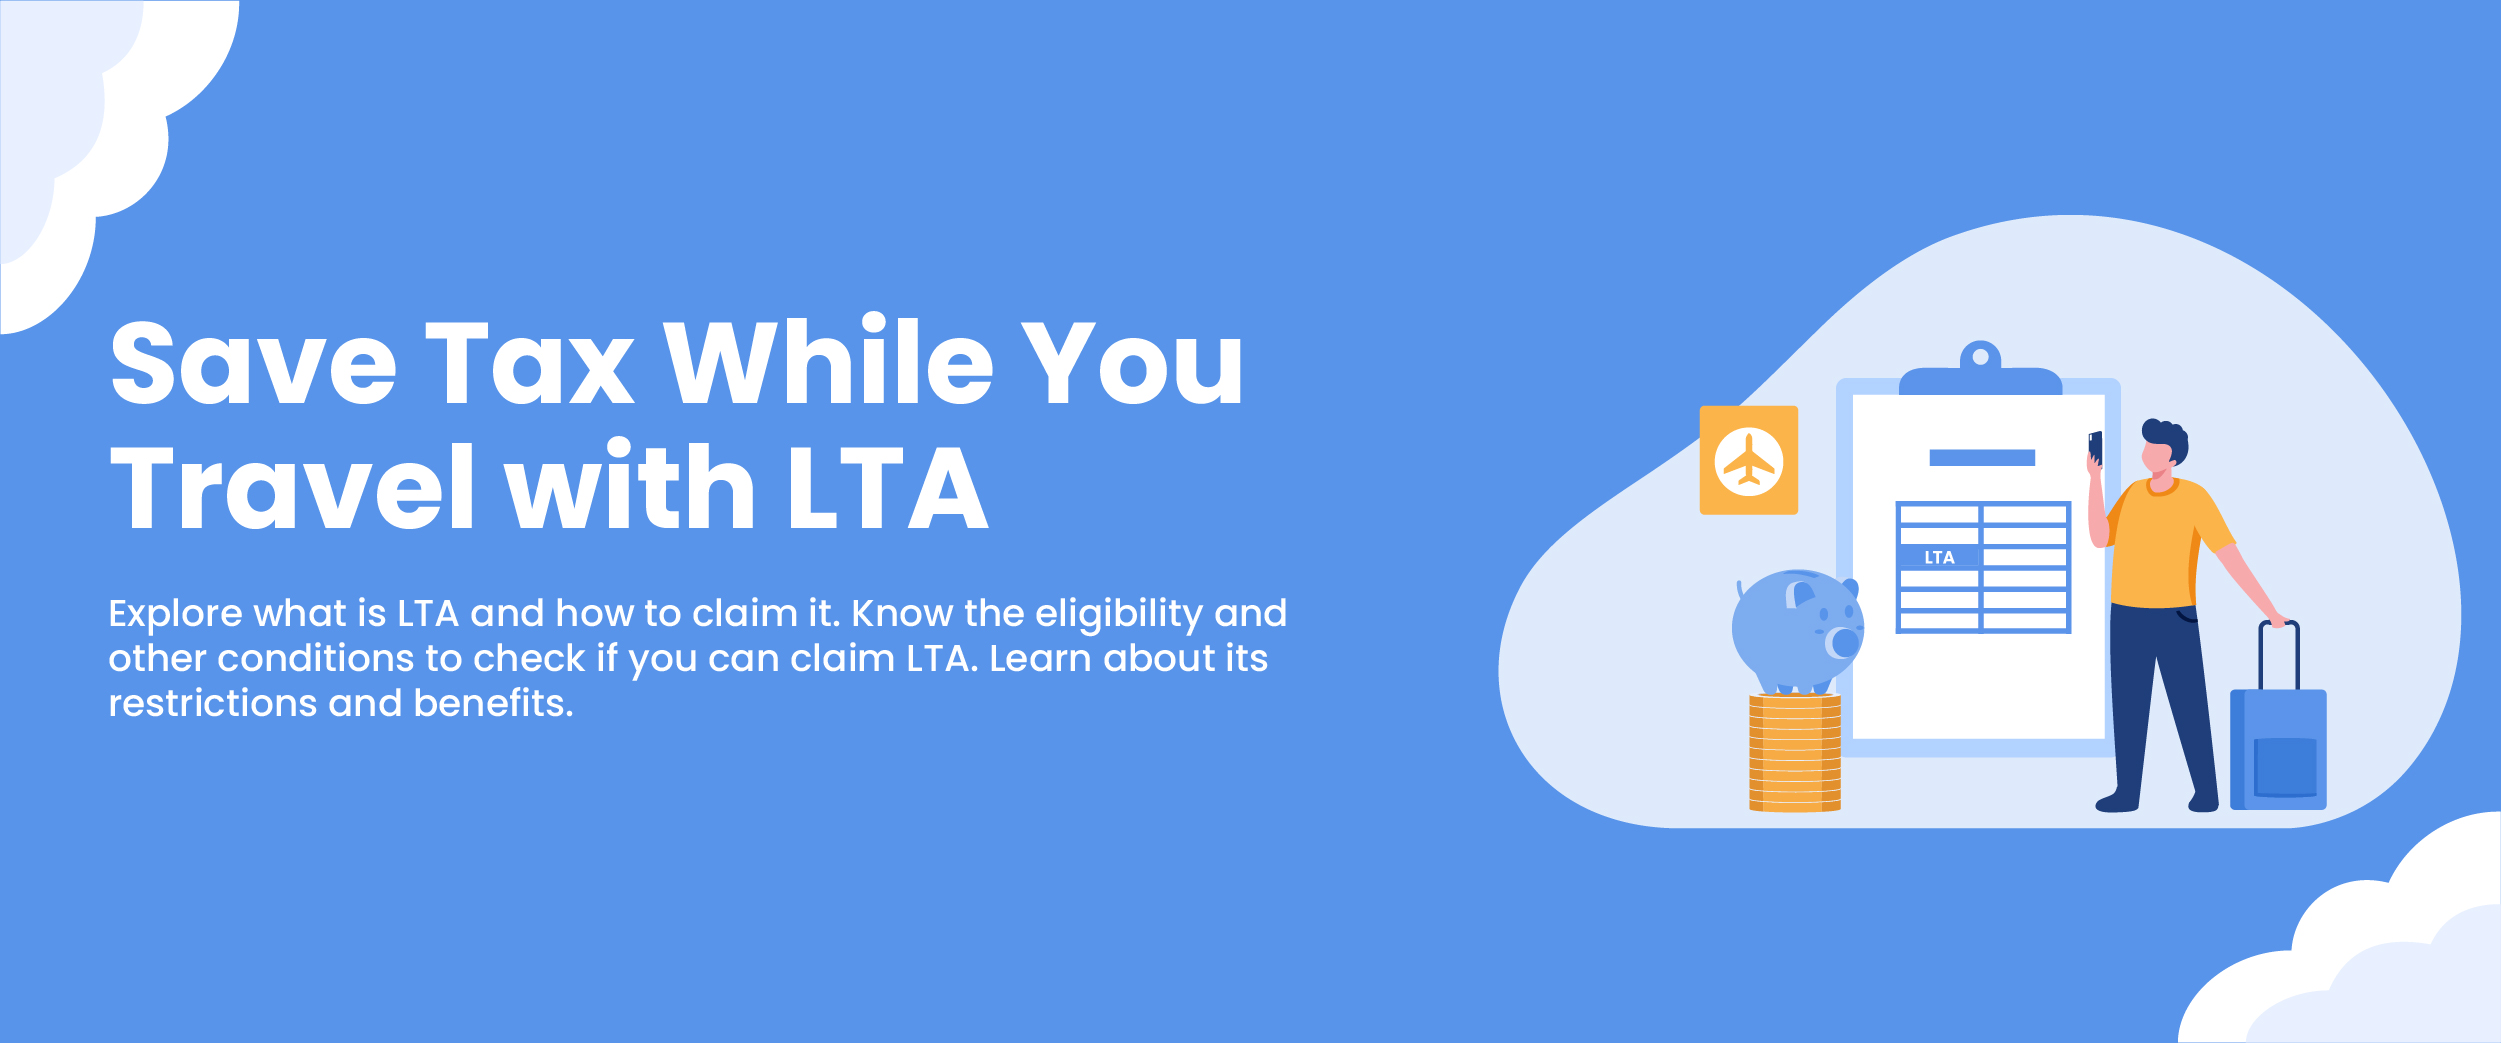 Save Tax While You Travel with LTA